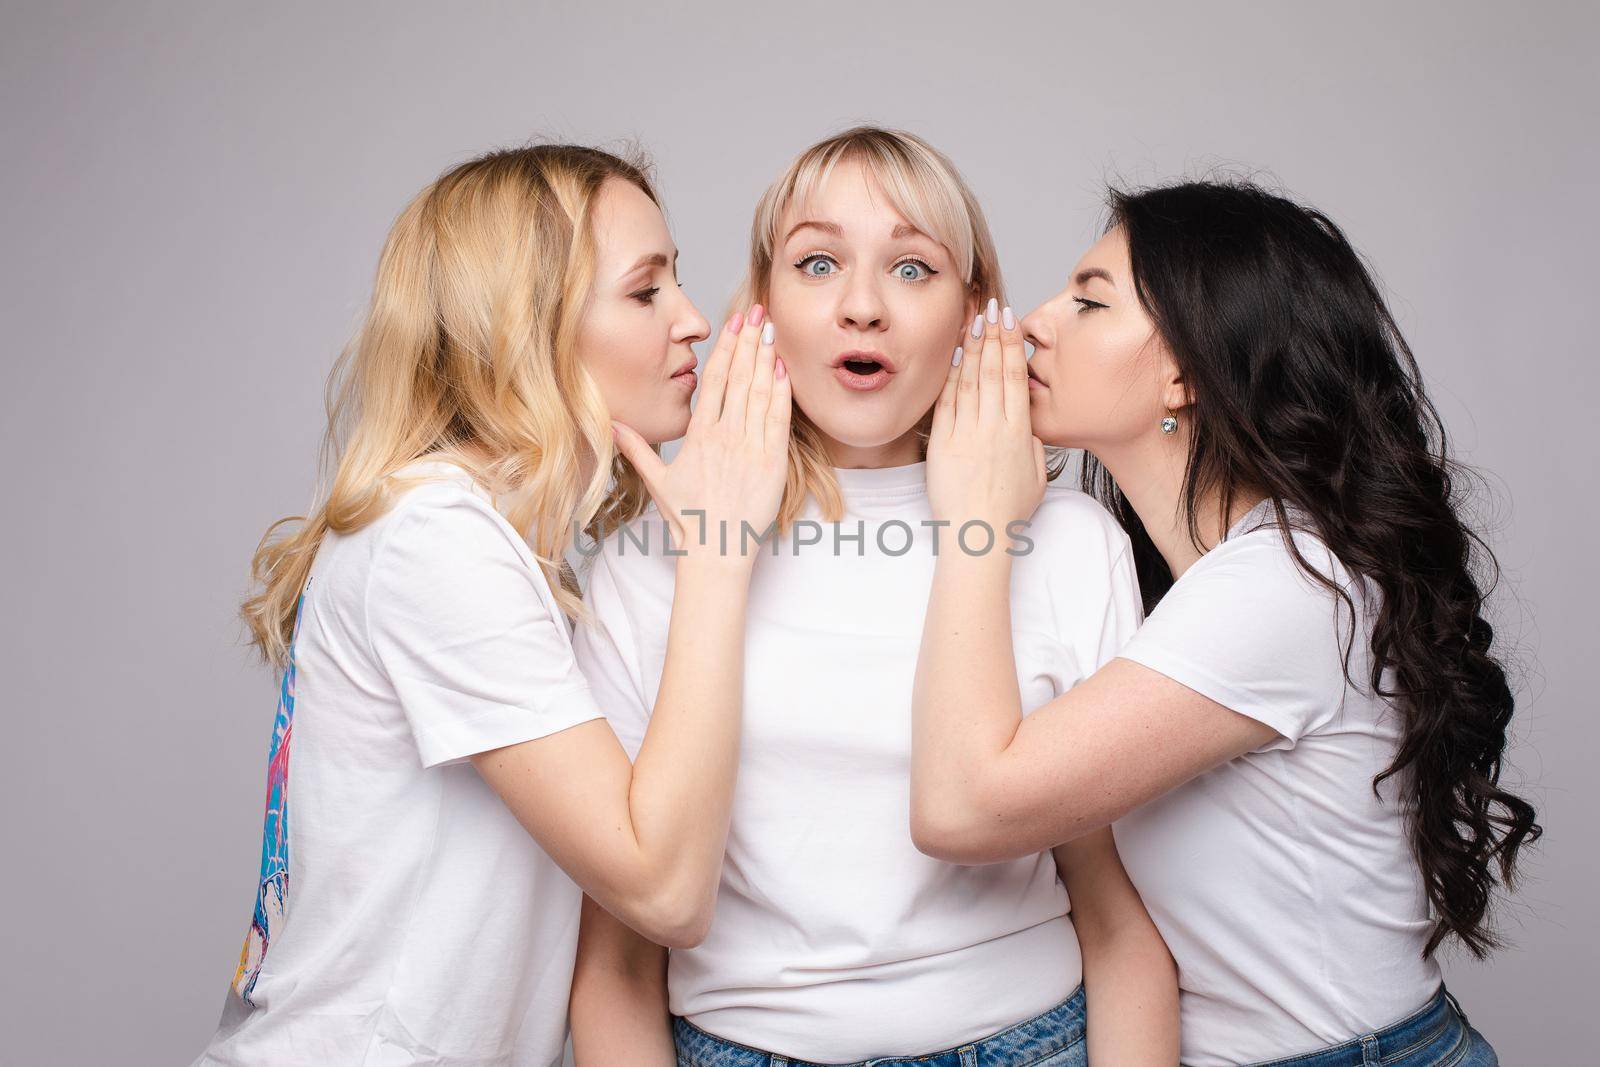 Blonde girl in white shirt looking surprised while her friends are telling her a secret in studio.